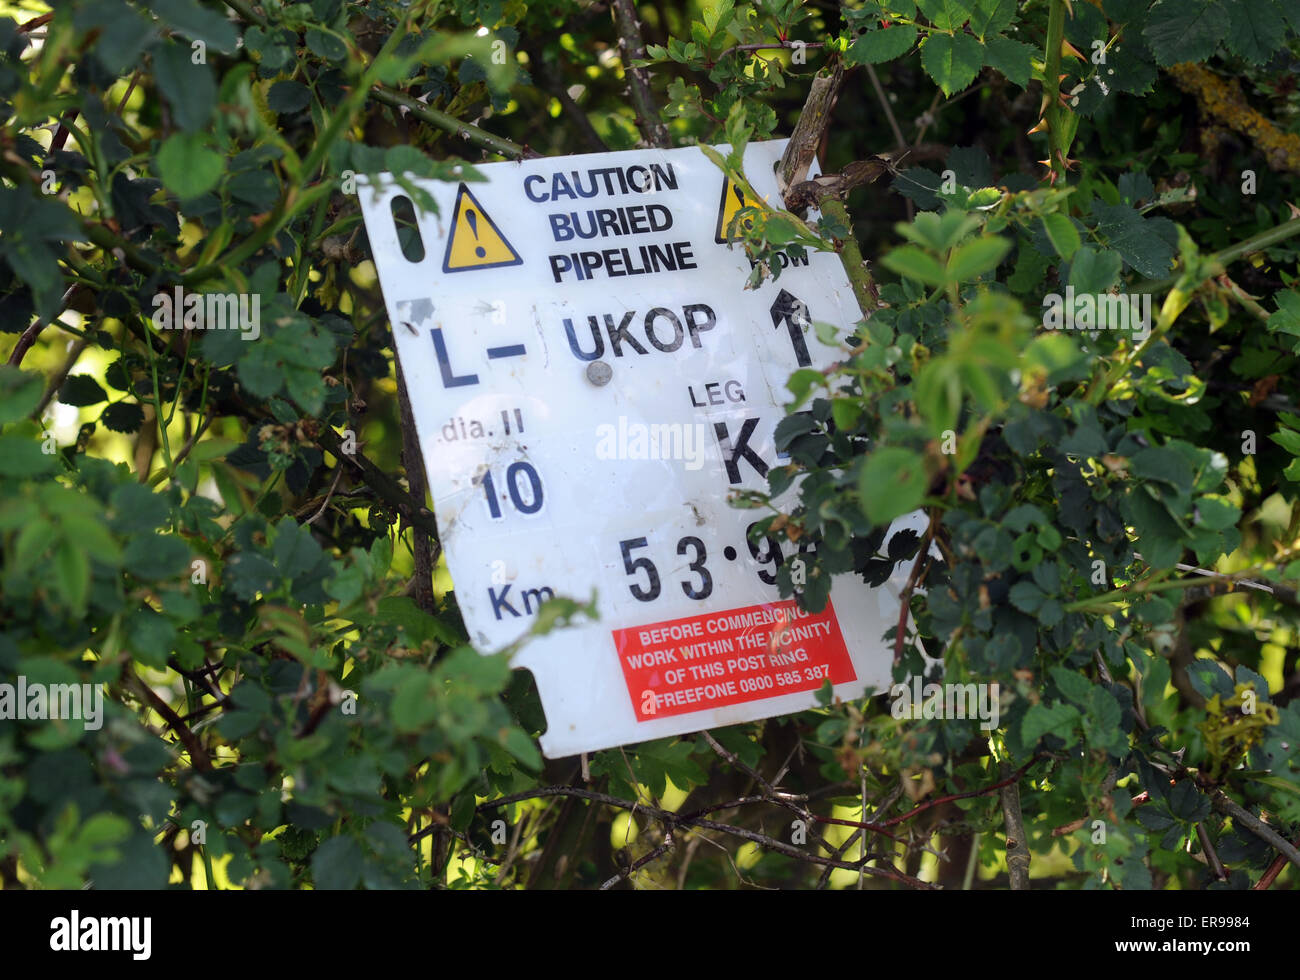 BURIED PIPELINE CAUTION SIGN RE SAFTEY WATERWAYS HAZARDS ENGLISH COUNTRYSIDE HOLIDAY VACATION CANALS LOCKS TOWPATH UK Stock Photo